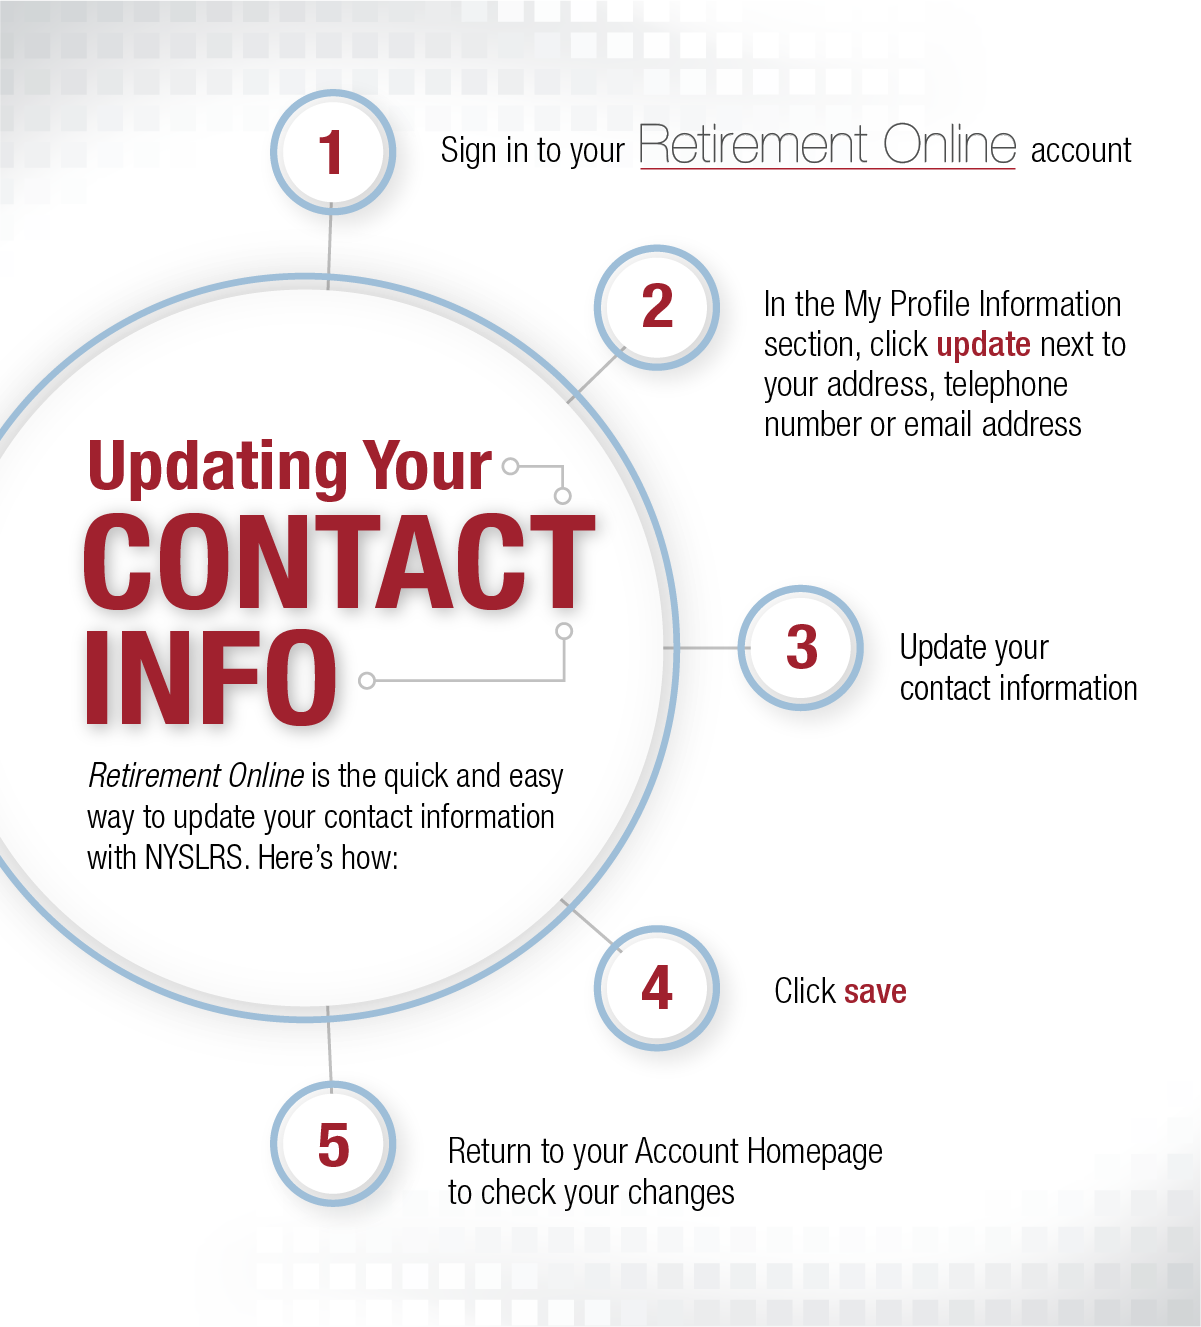 update your mailing address and contact info in Retirement Online